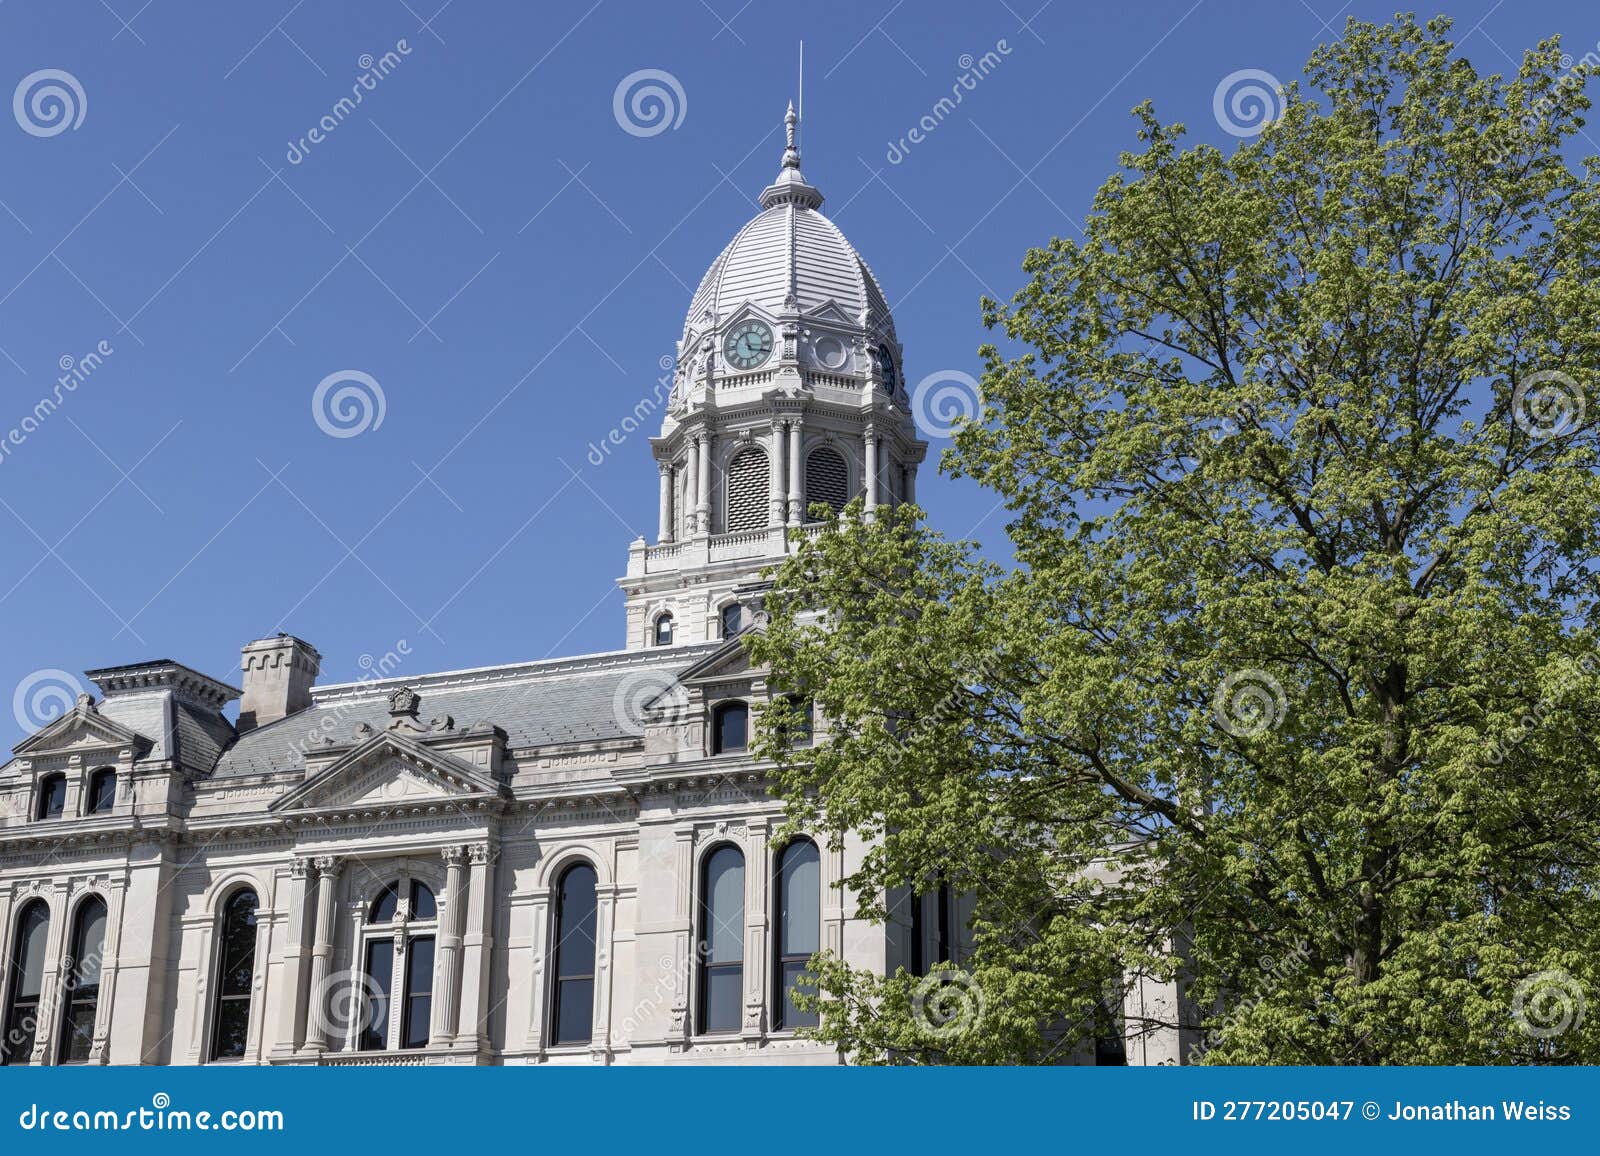 kosciusko county courthouse. built in second empire architectural style, construction began in 1881 and finished in 1884